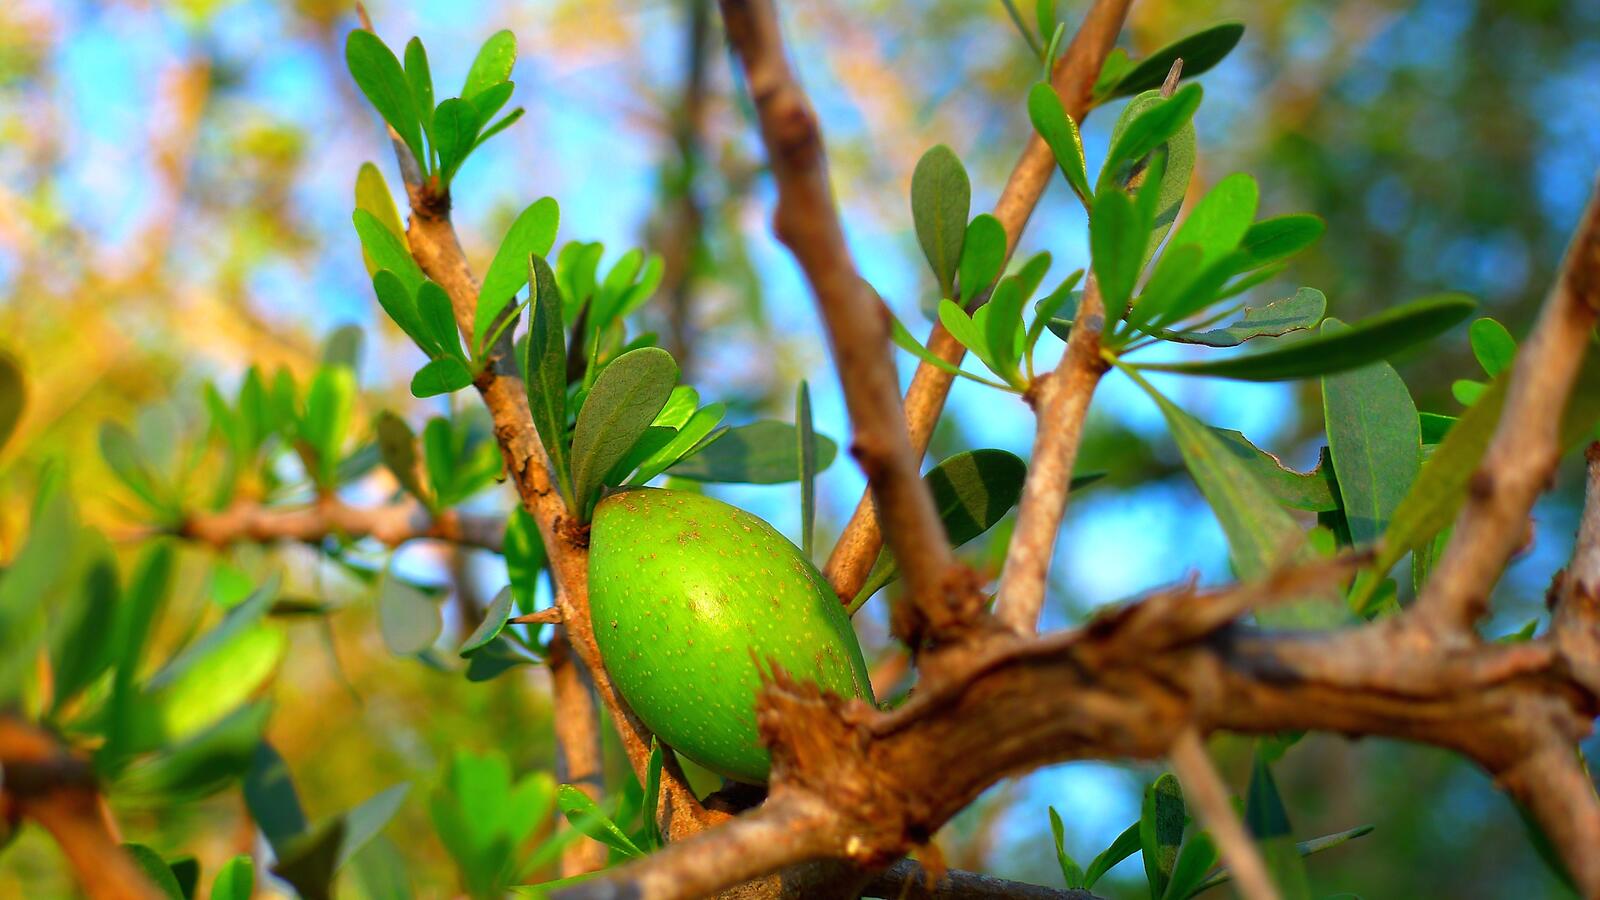 Free photo The green fruit grows on the tree